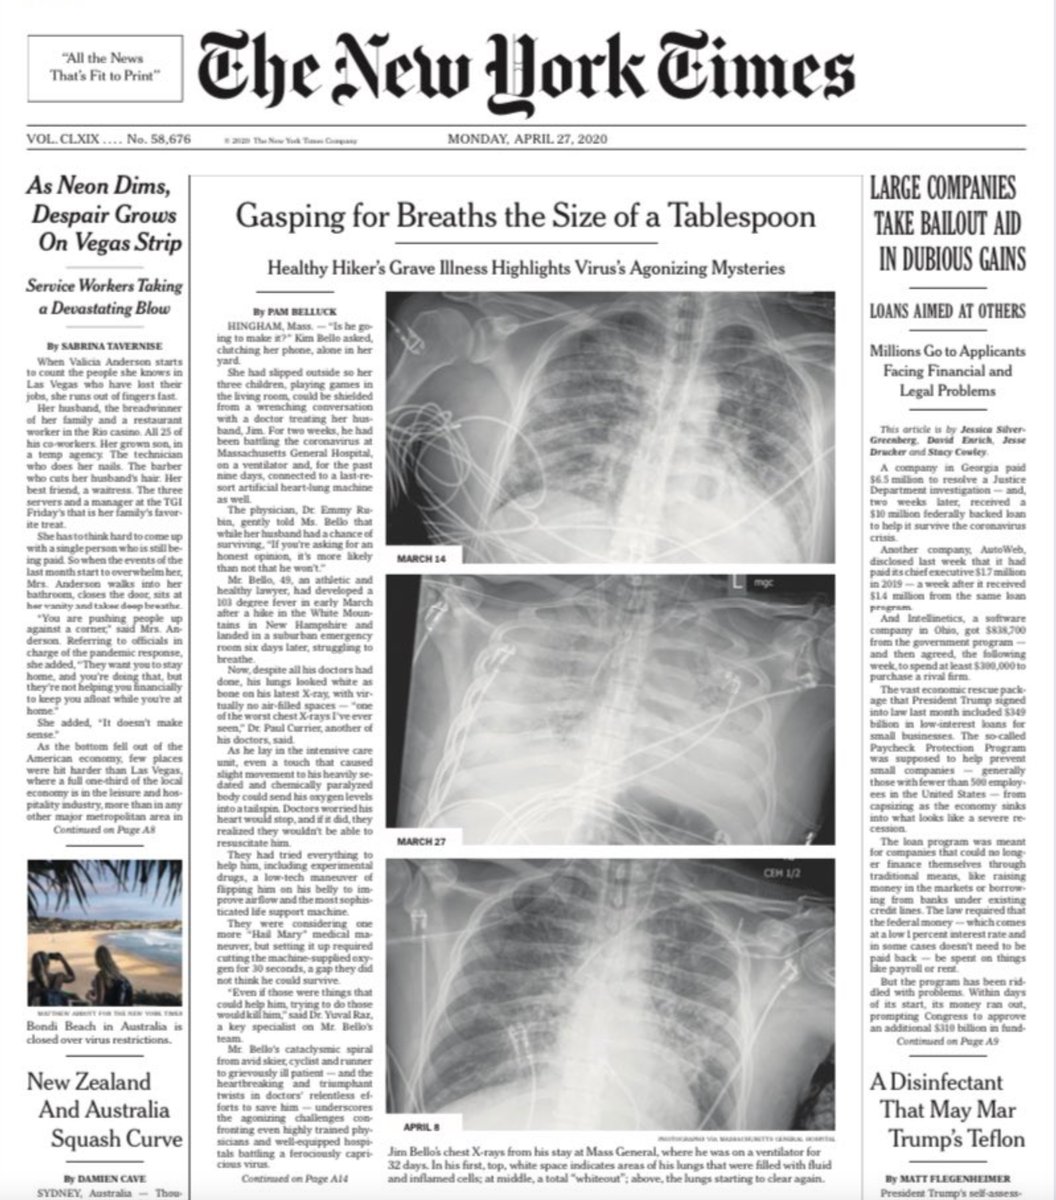 3 New reports that argue against the idea of sending the young, healthy to reopen the US1. Tomorrow's  @nytimes headline story, by  @PamBelluck  https://www.nytimes.com/2020/04/26/health/coronavirus-patient-ventilator.html?action=click&module=Spotlight&pgtype=Homepage2.  @ICNARC UK new ICU report  https://www.icnarc.org/Our-Audit/Audits/Cmp/Reports3.  @kpnorcal  @KPDOR Kaiser  https://jamanetwork.com/journals/jama/fullarticle/2765303